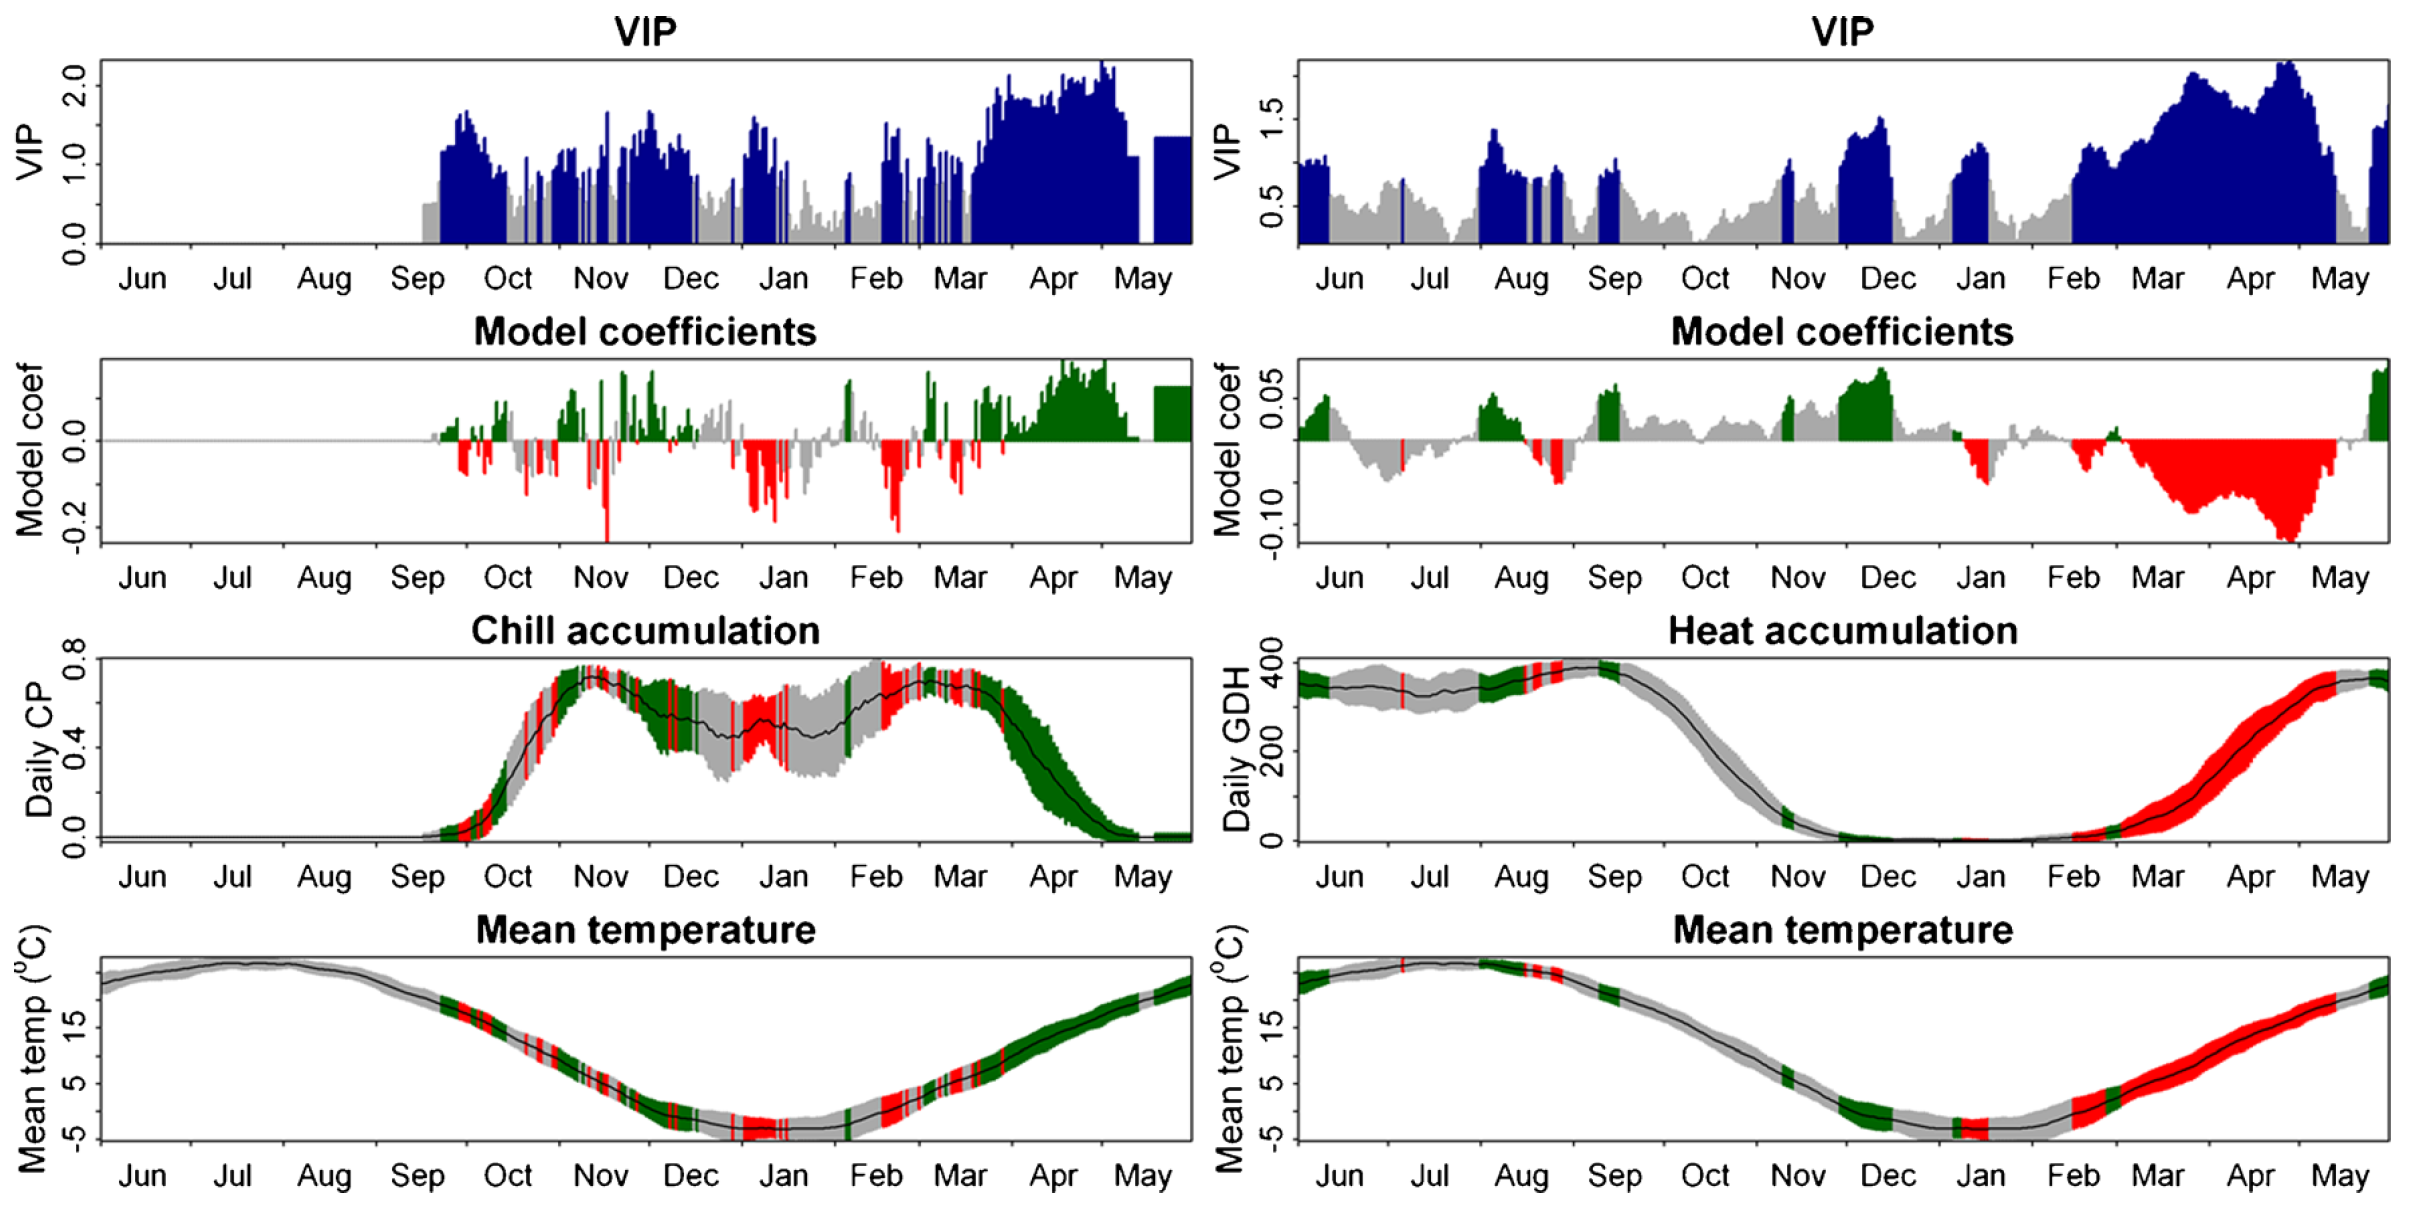 Results of a PLS analysis based on the relationship between daily chill (quantified with the Dynamic Model) and heat (quantified with the GDH model) accumulation and bloom of jujube (Ziziphus jujuba) in Beijing, China (Guo et al., 2014a)